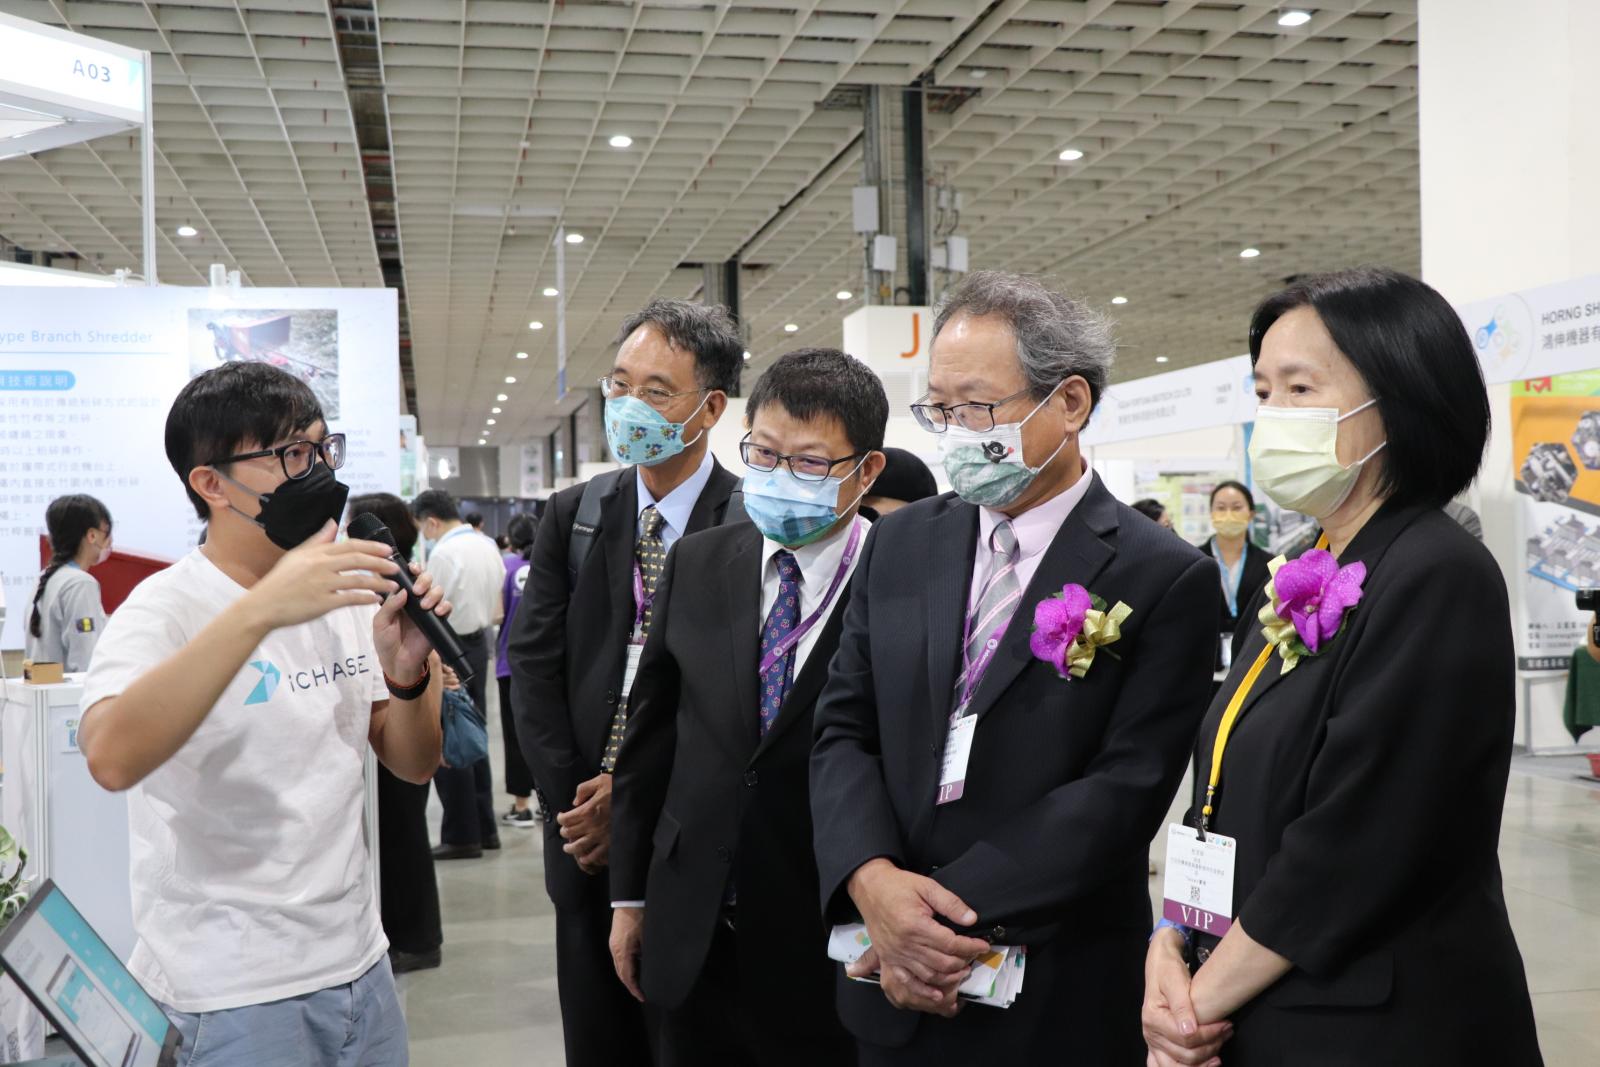 Deputy Minister Chin-Cheng Huang of the Council of Agriculture visits the Taiwan Agricultural Technology Pavilion.